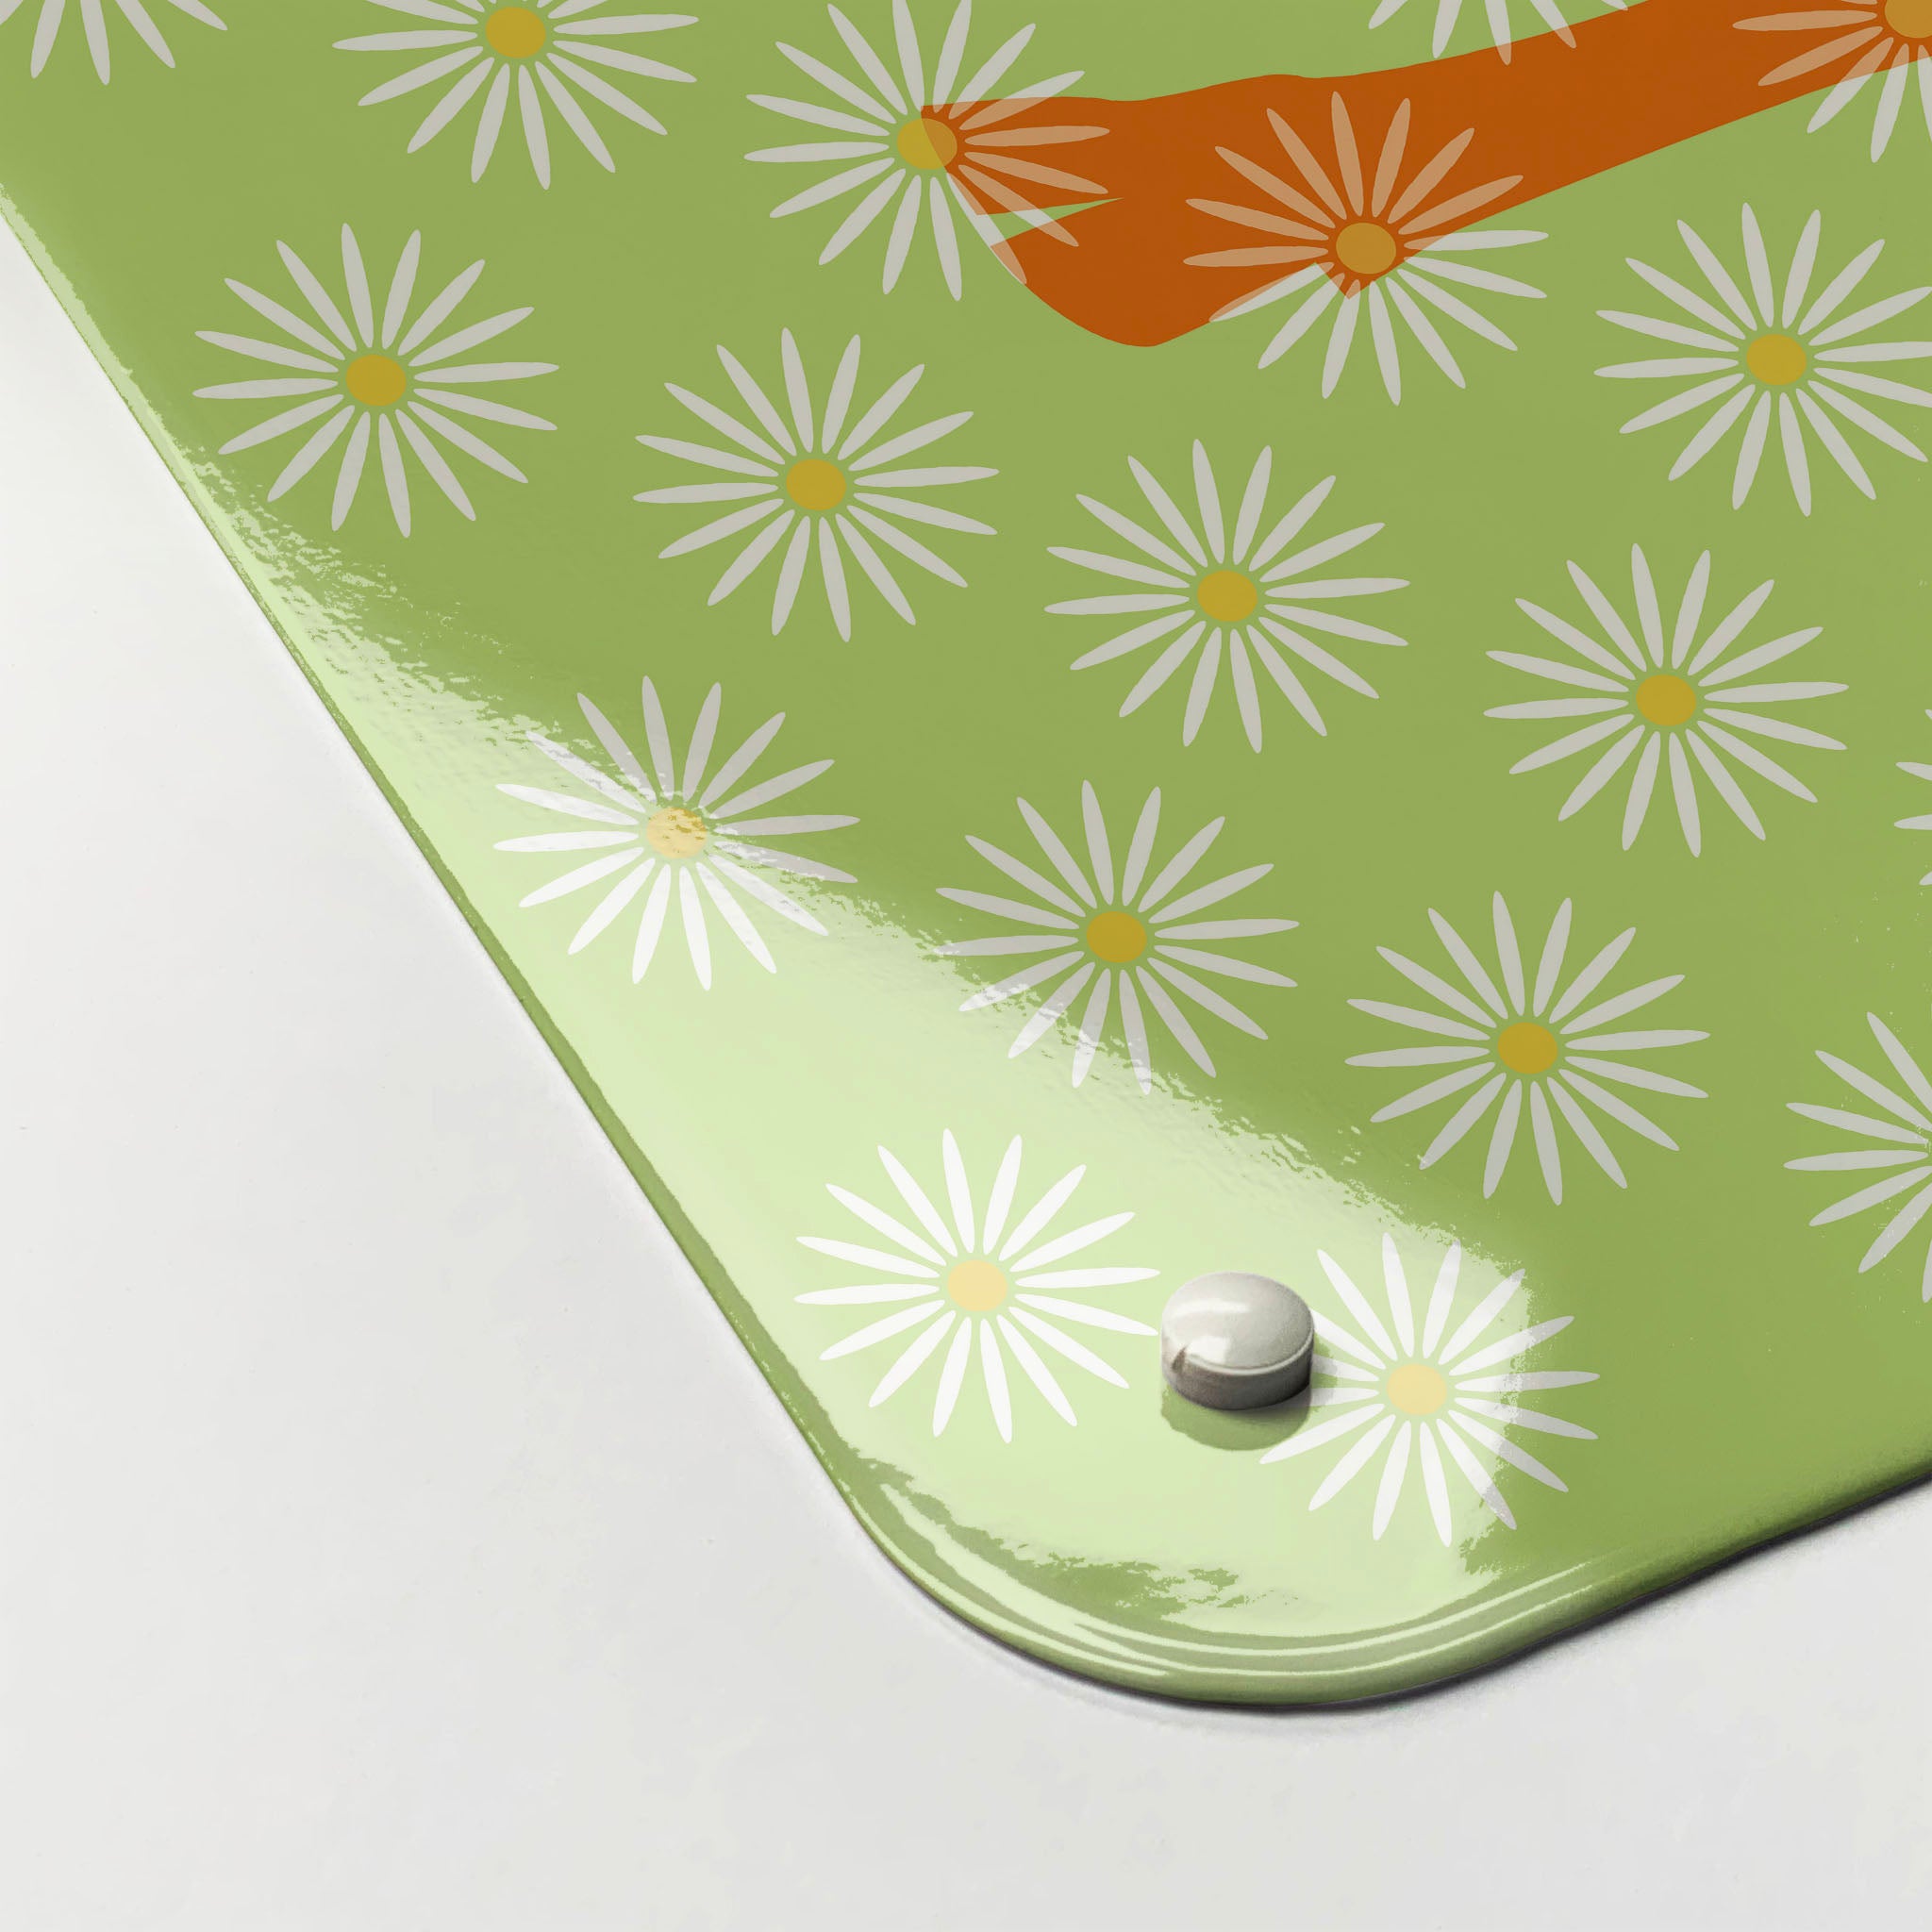 The corner detail of a daisy the cow orange design magnetic board to show it’s high gloss surface